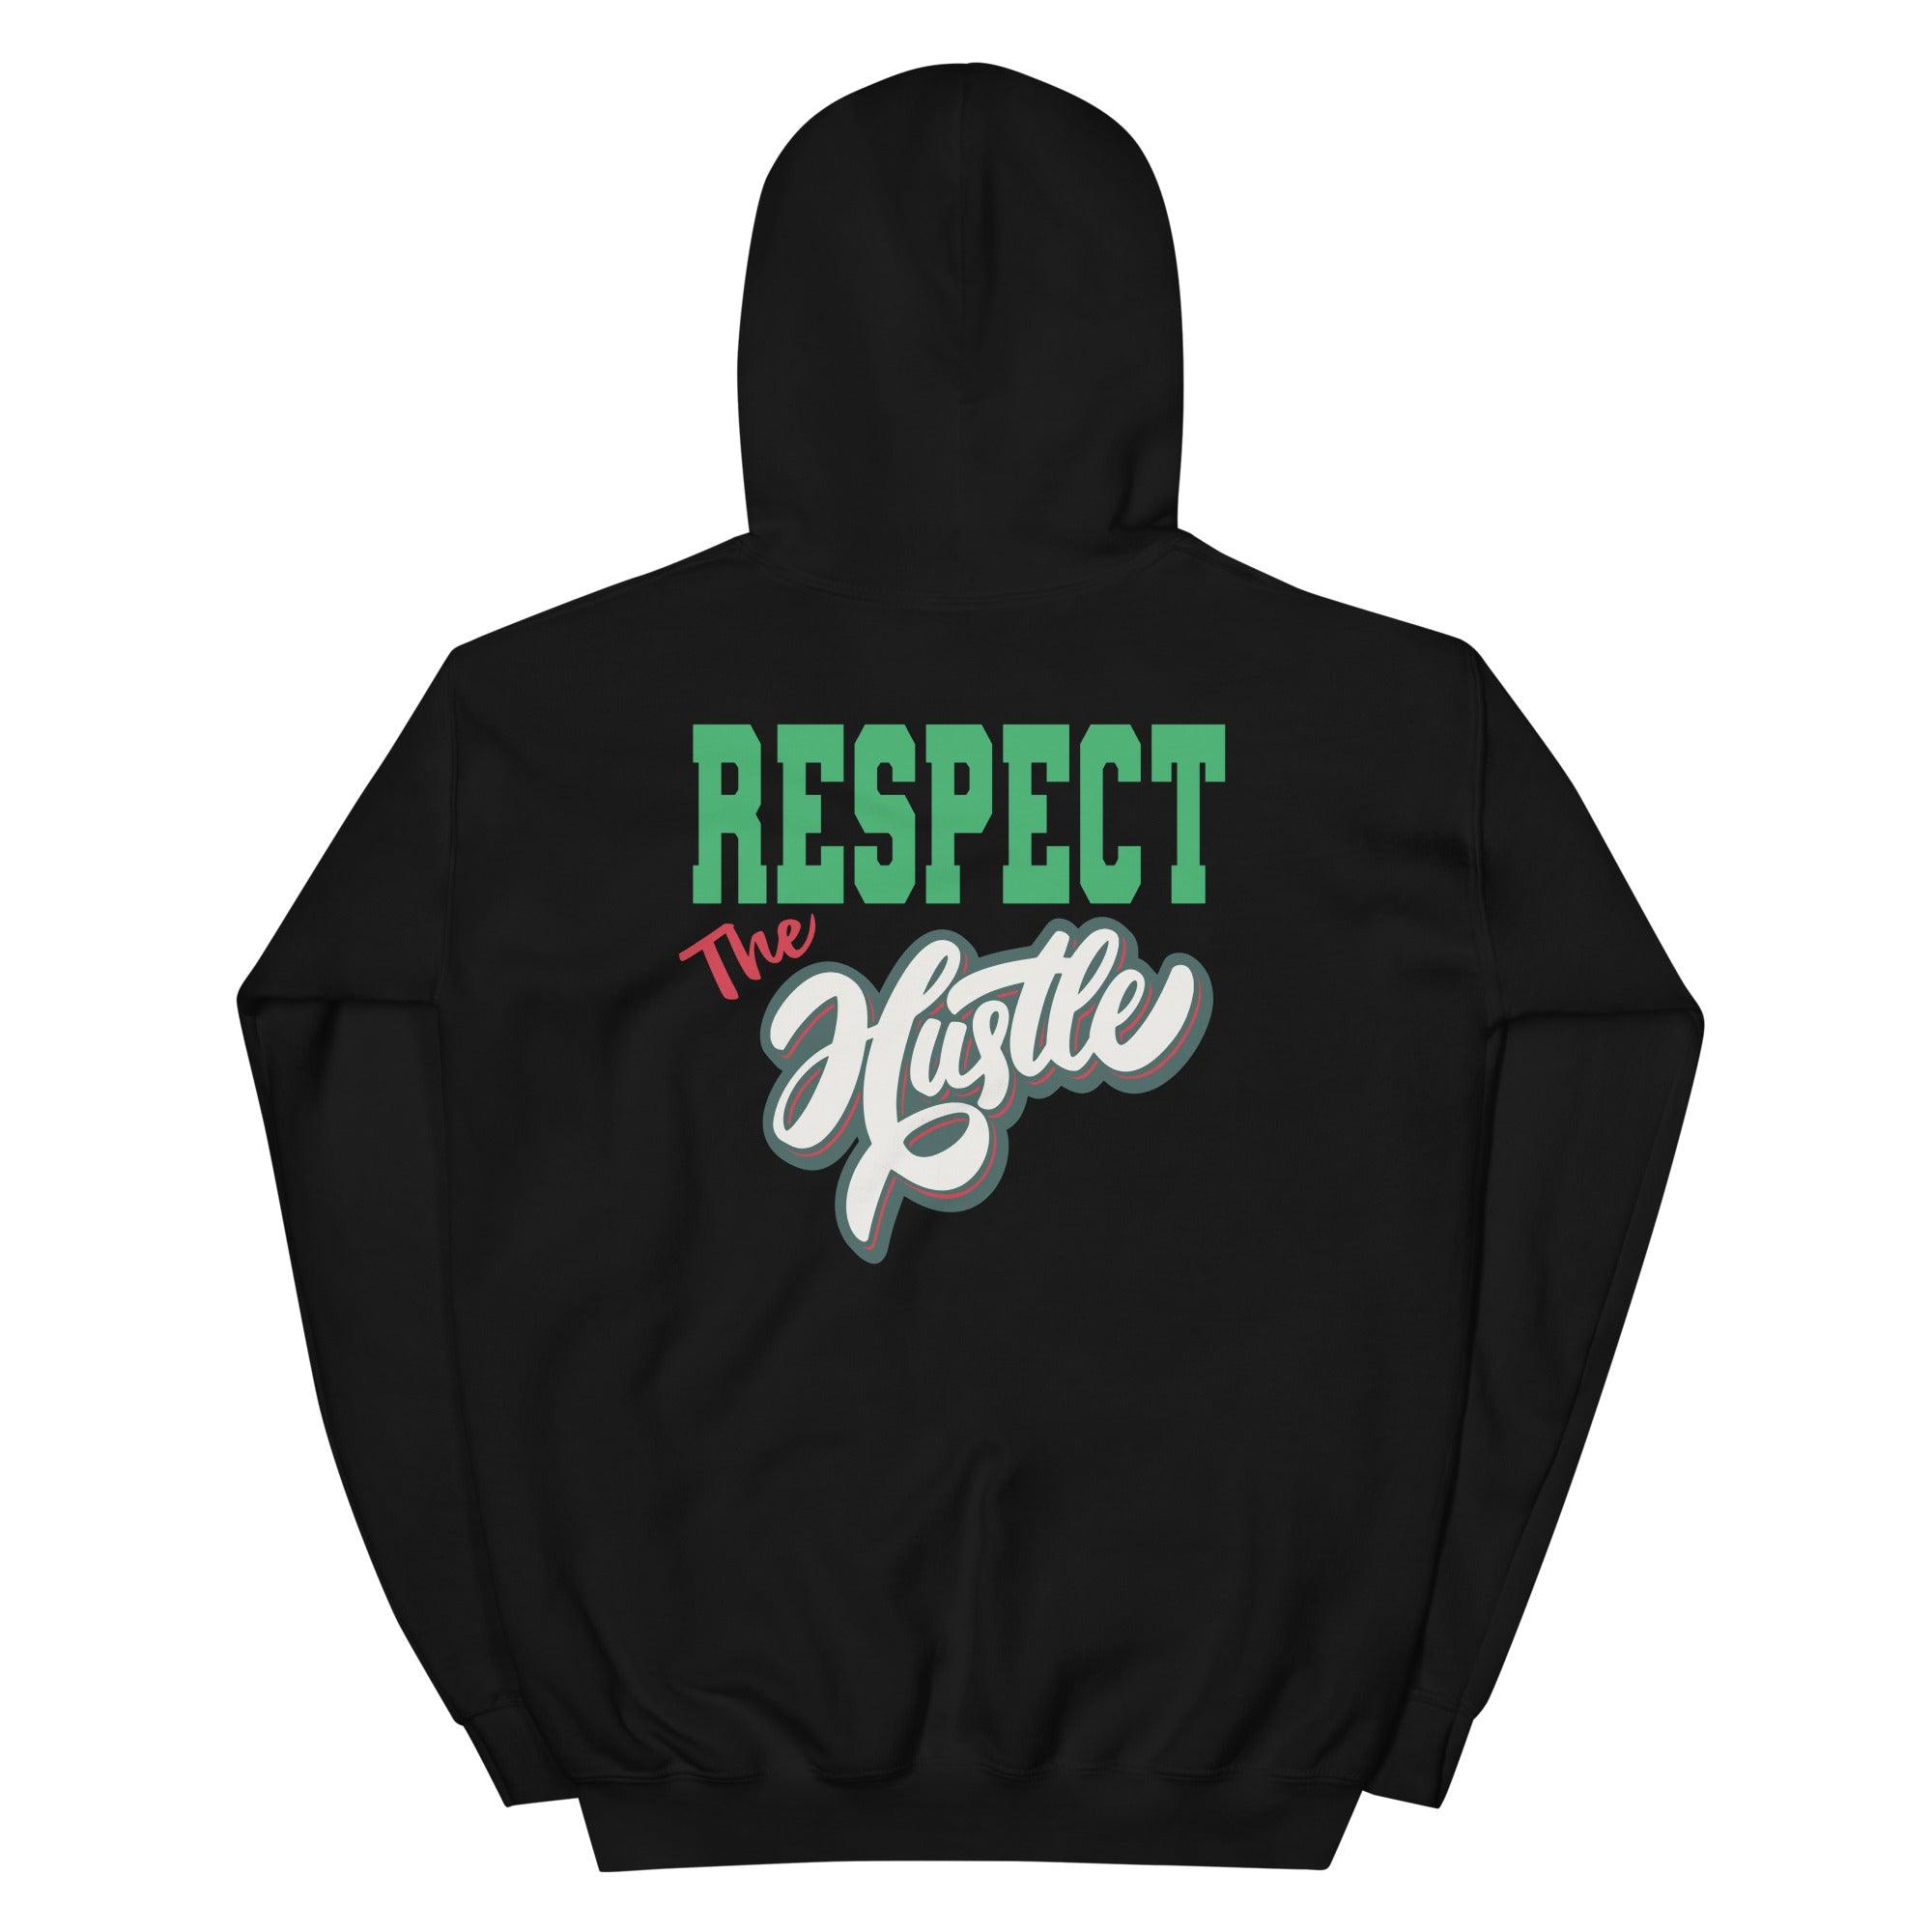 Respect The Hustle Hoodie AIR MAX 90 NORDIC CHRISTMAS Sneakers photo